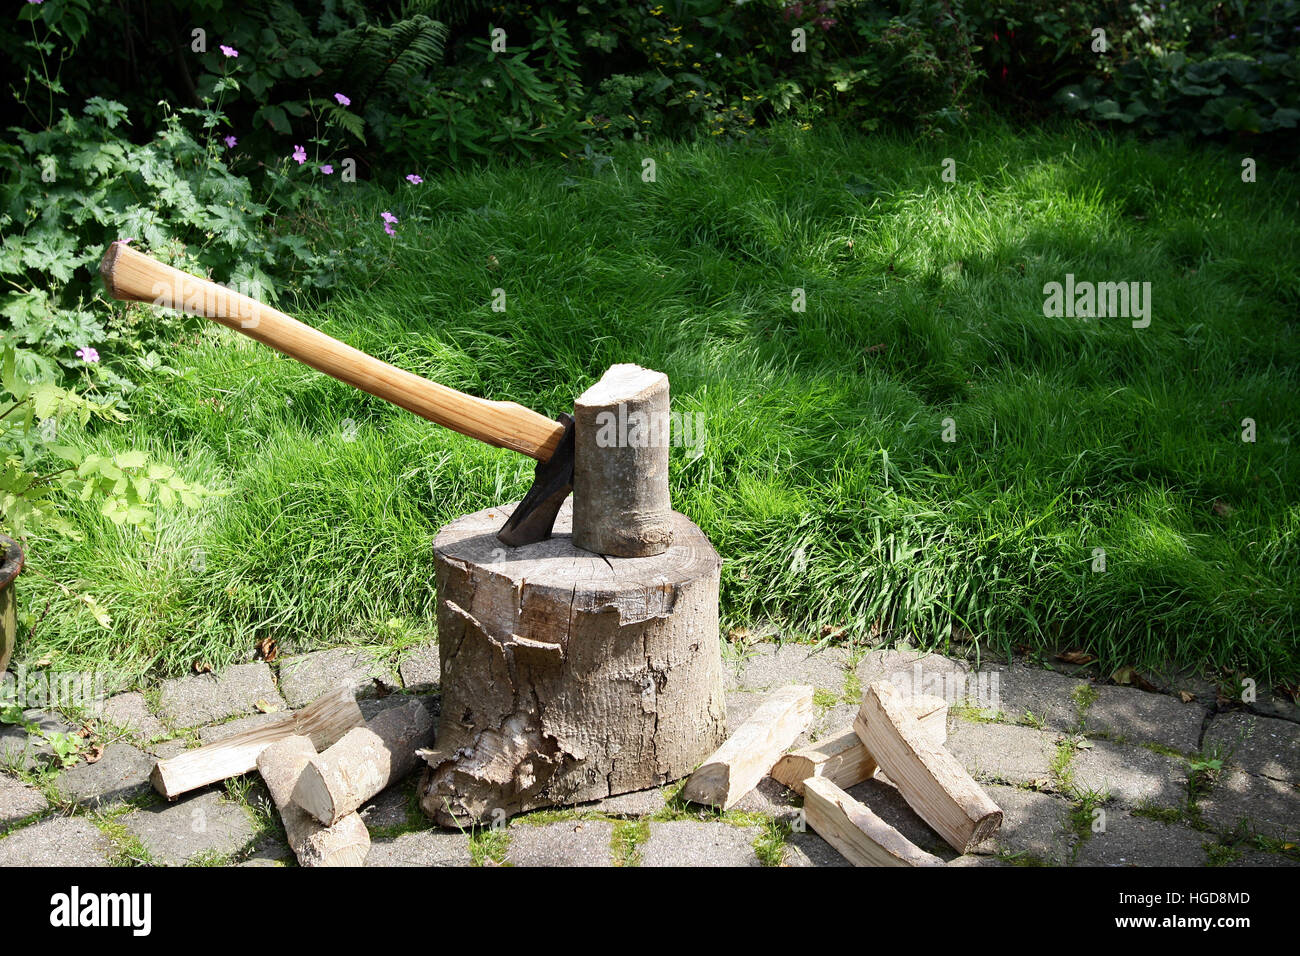 Chopping block with woodcleaver axe in a garden. Stock Photo